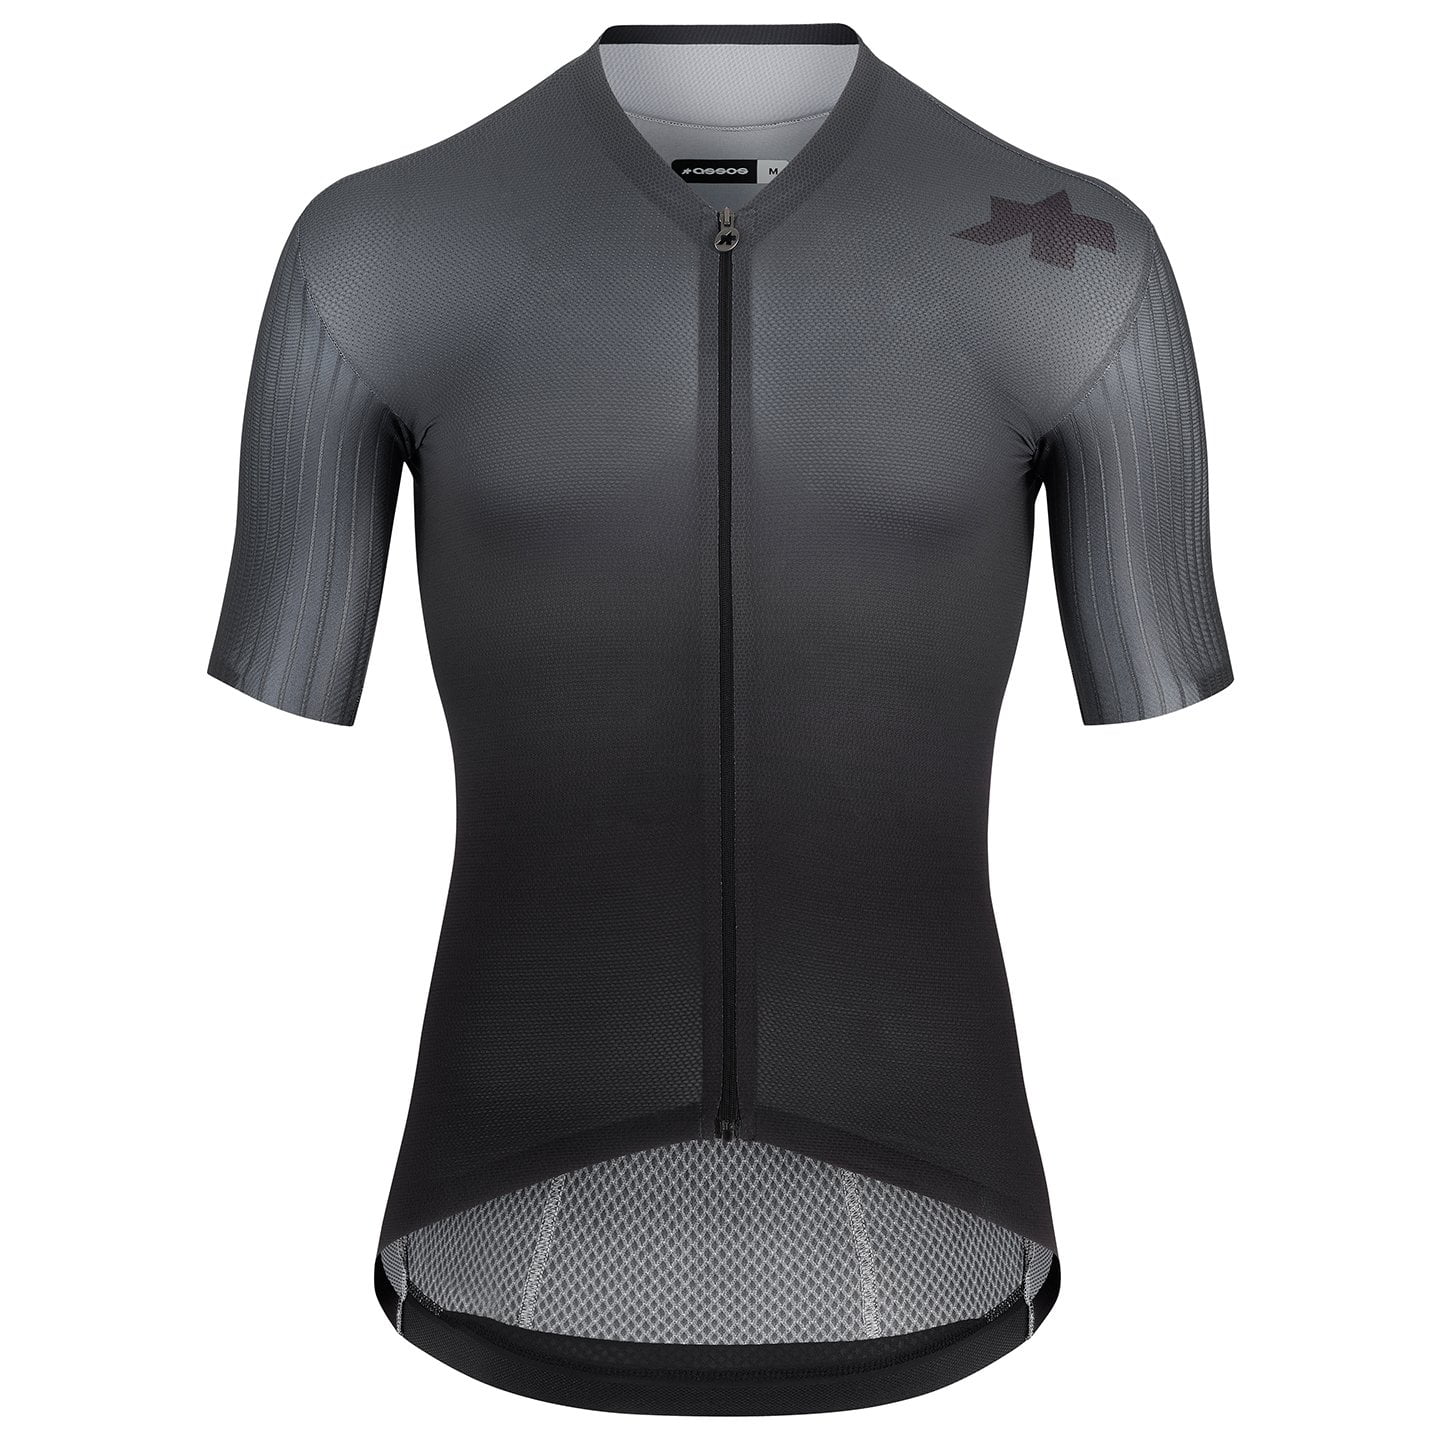 ASSOS Equipe RS S11 Short Sleeve Jersey, for men, size L, Cycling jersey, Cycling clothing